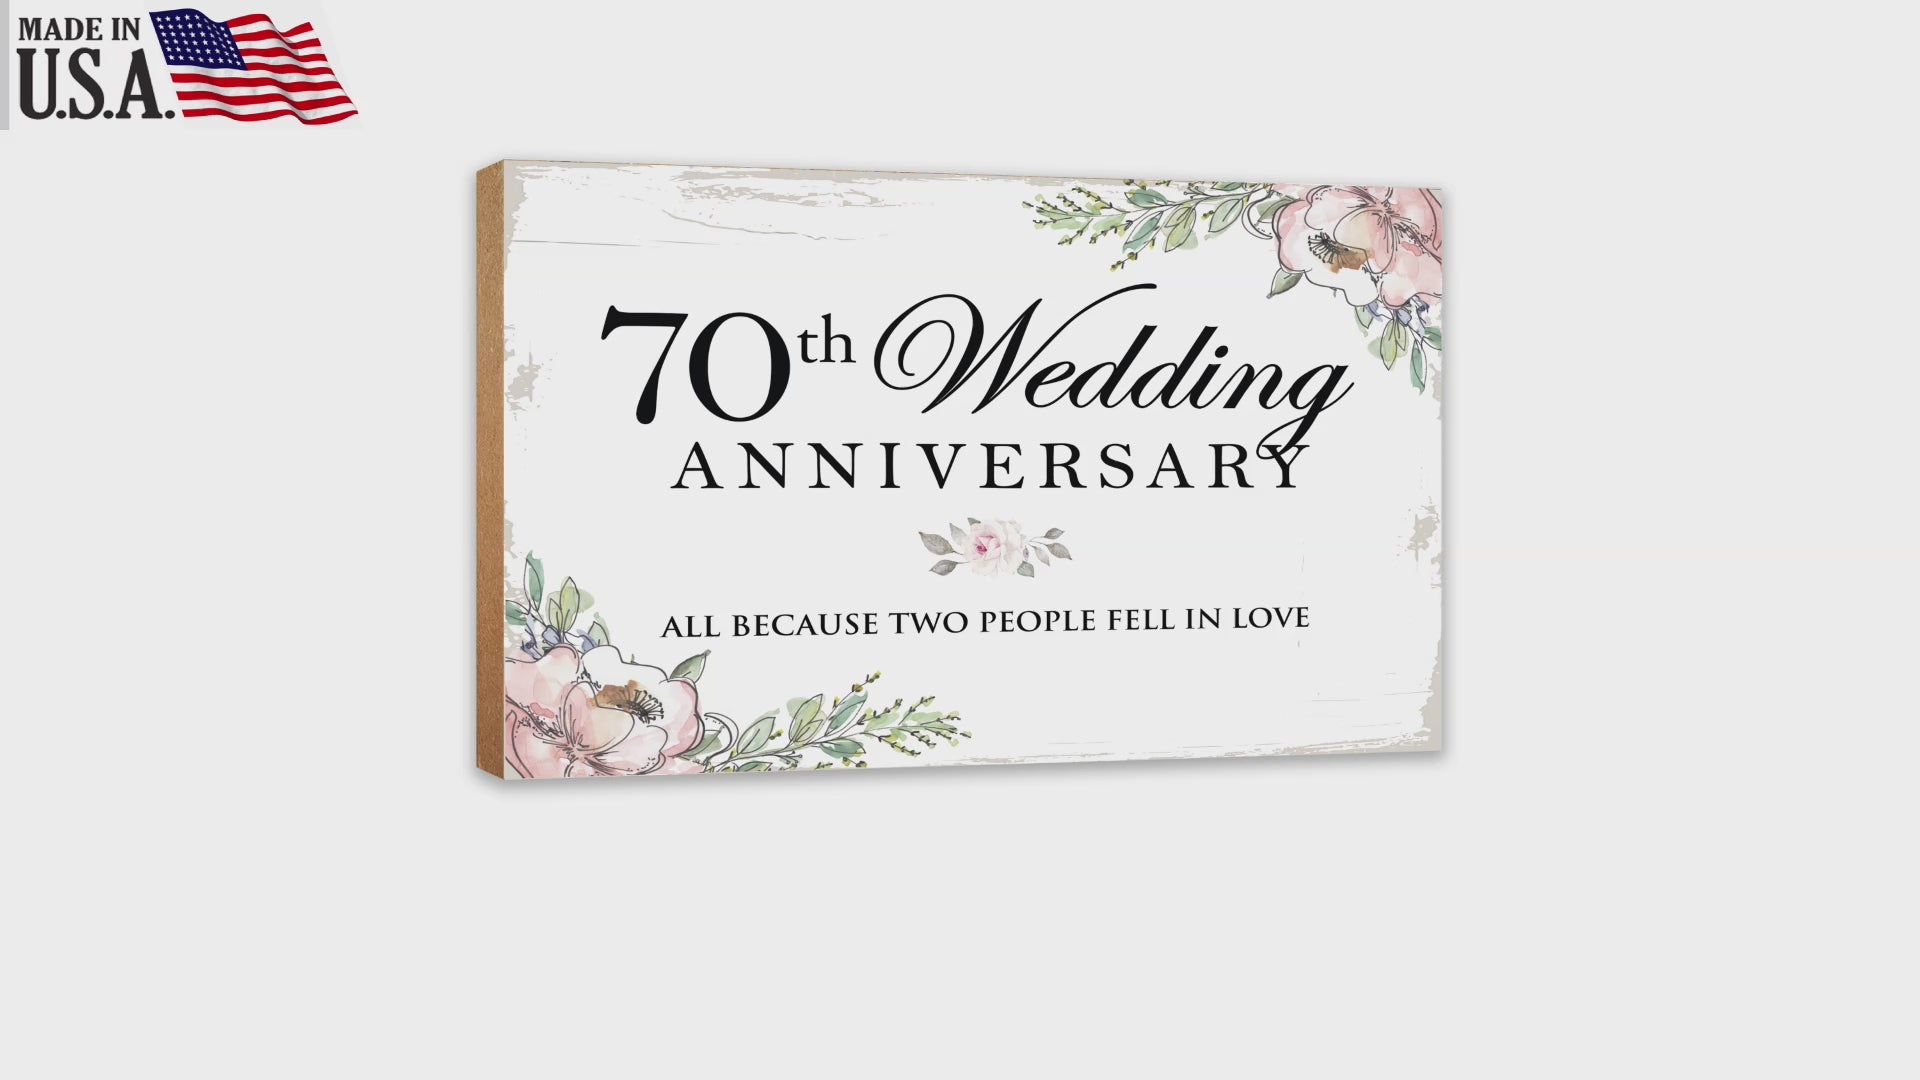 70th Wedding Anniversary Unique Shelf Decor and Tabletop Signs Gift for Couples - Fell In Love